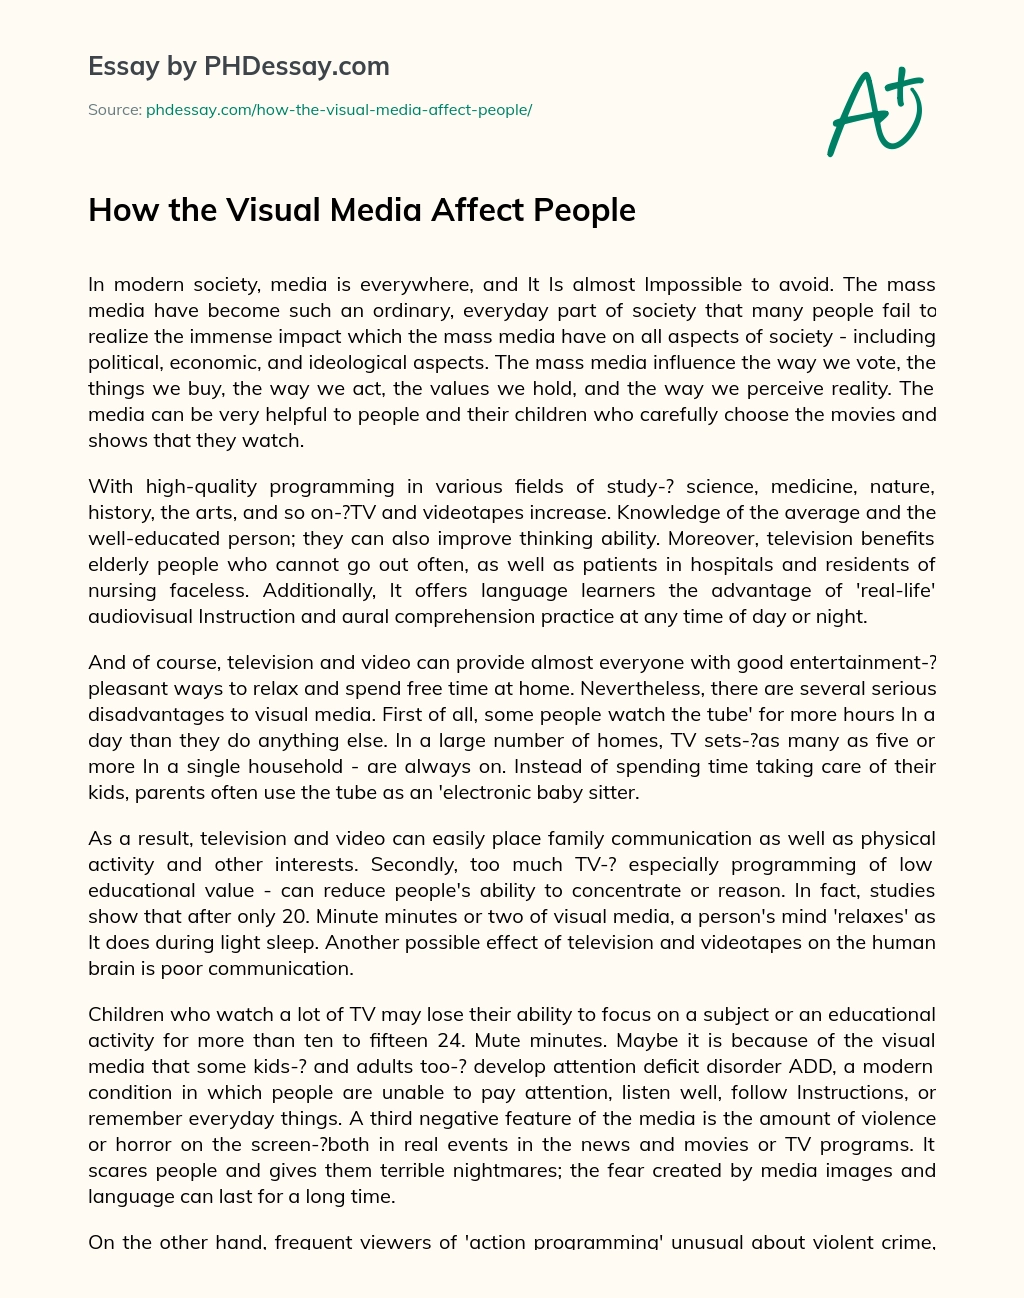 How the Visual Media Affect People essay